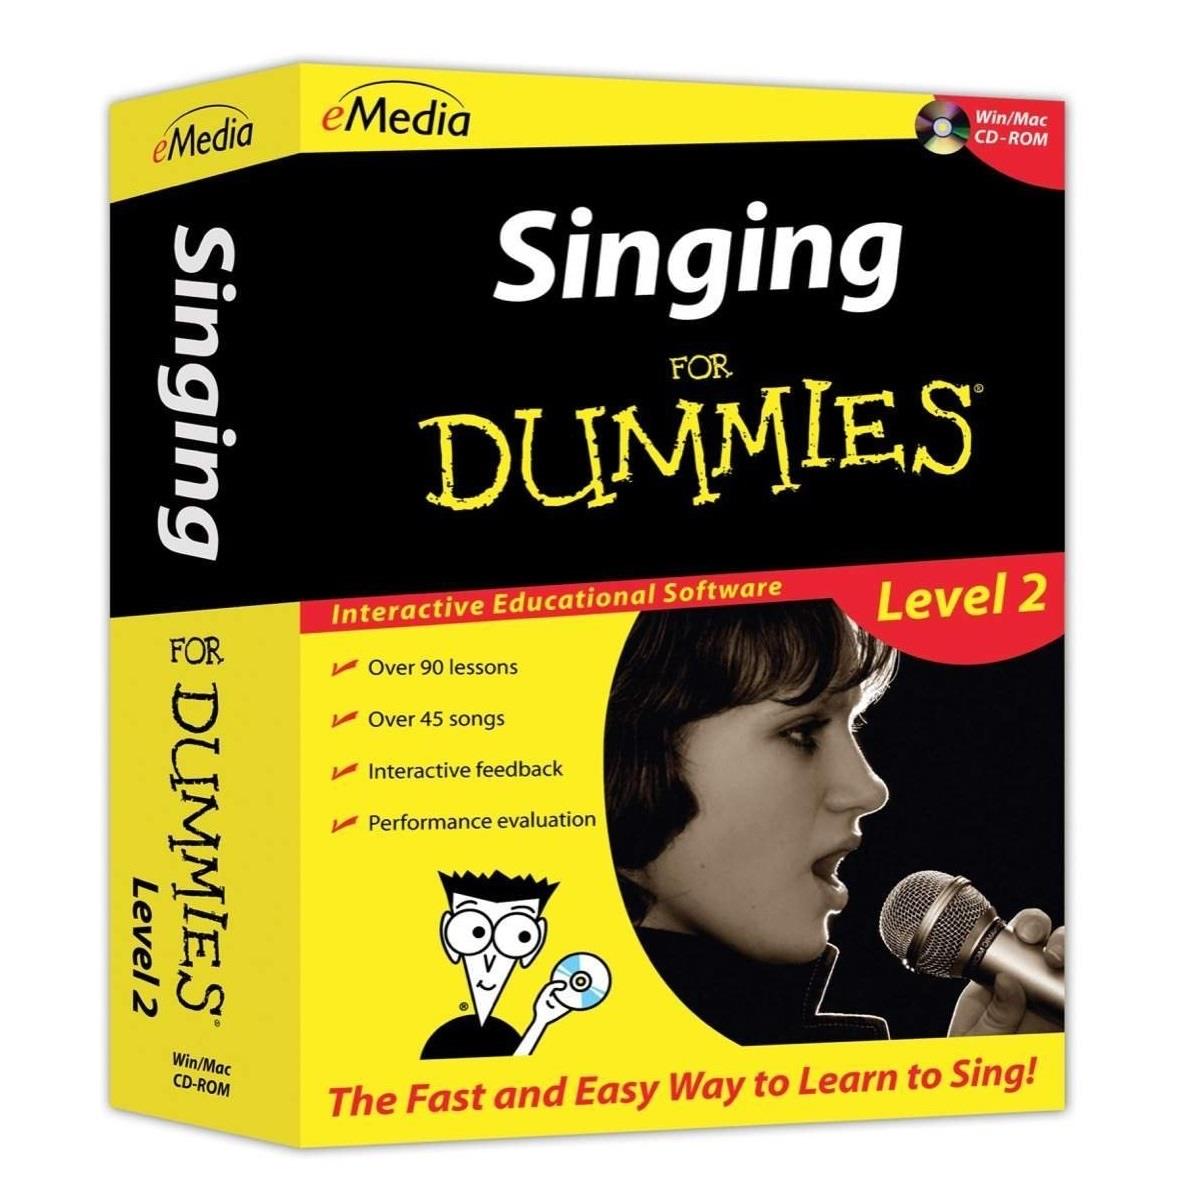 eMedia Singing For Dummies Level 2 Software for Mac, Electronic Download -  FD09144DLM